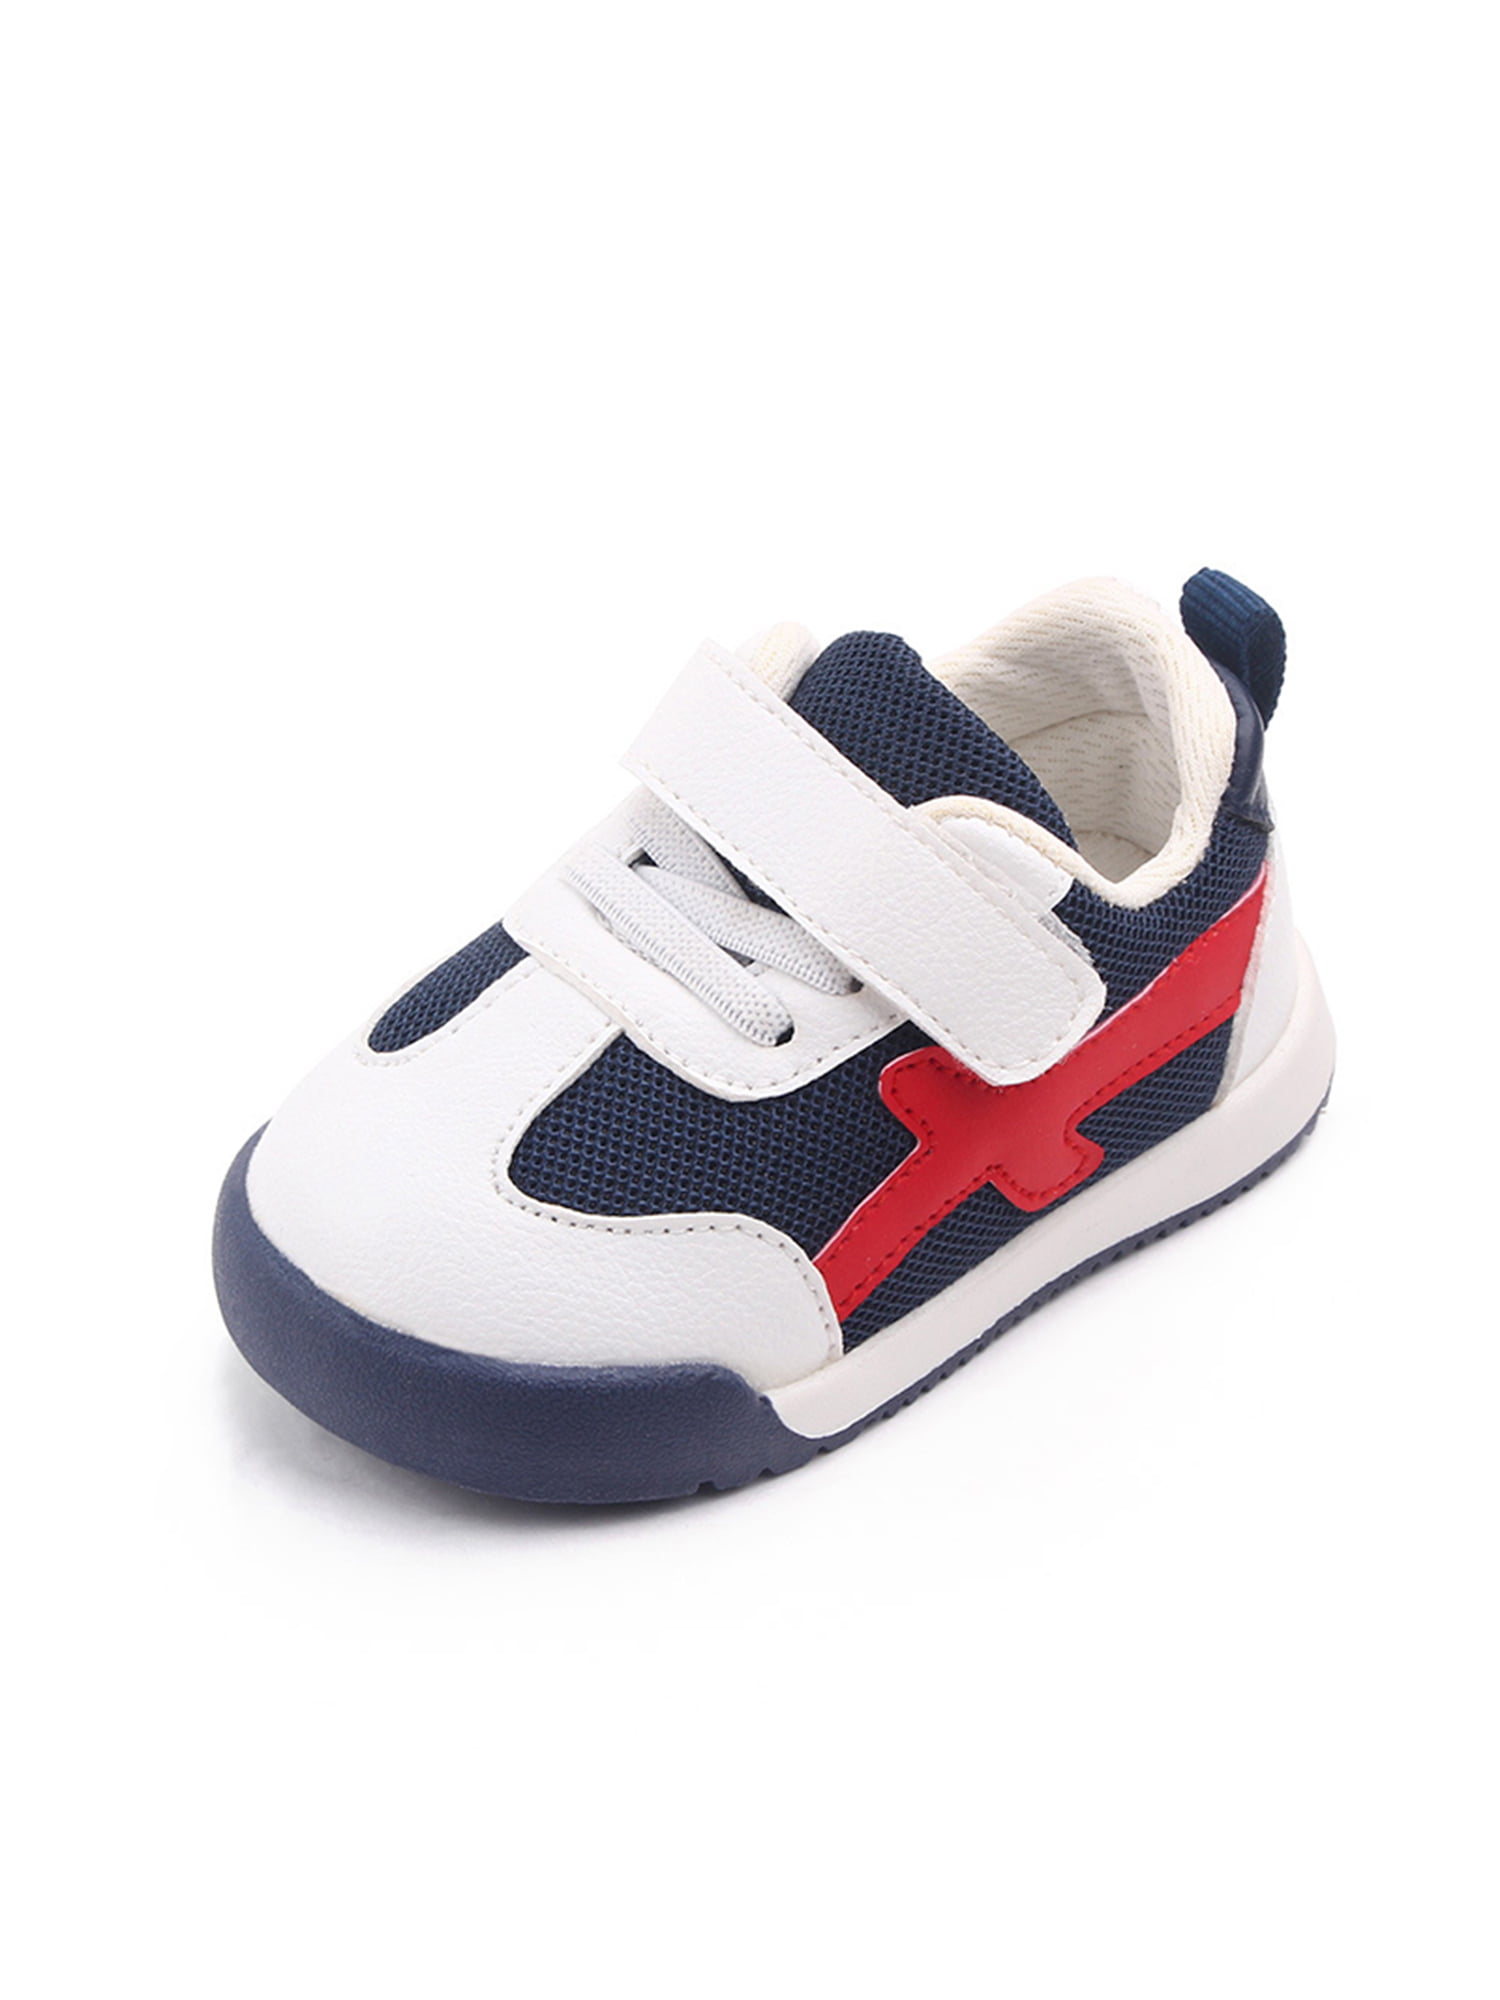 Kids Boys Girls Trainers Sneakers Children Comfort Casual Athletic Running Shoes 